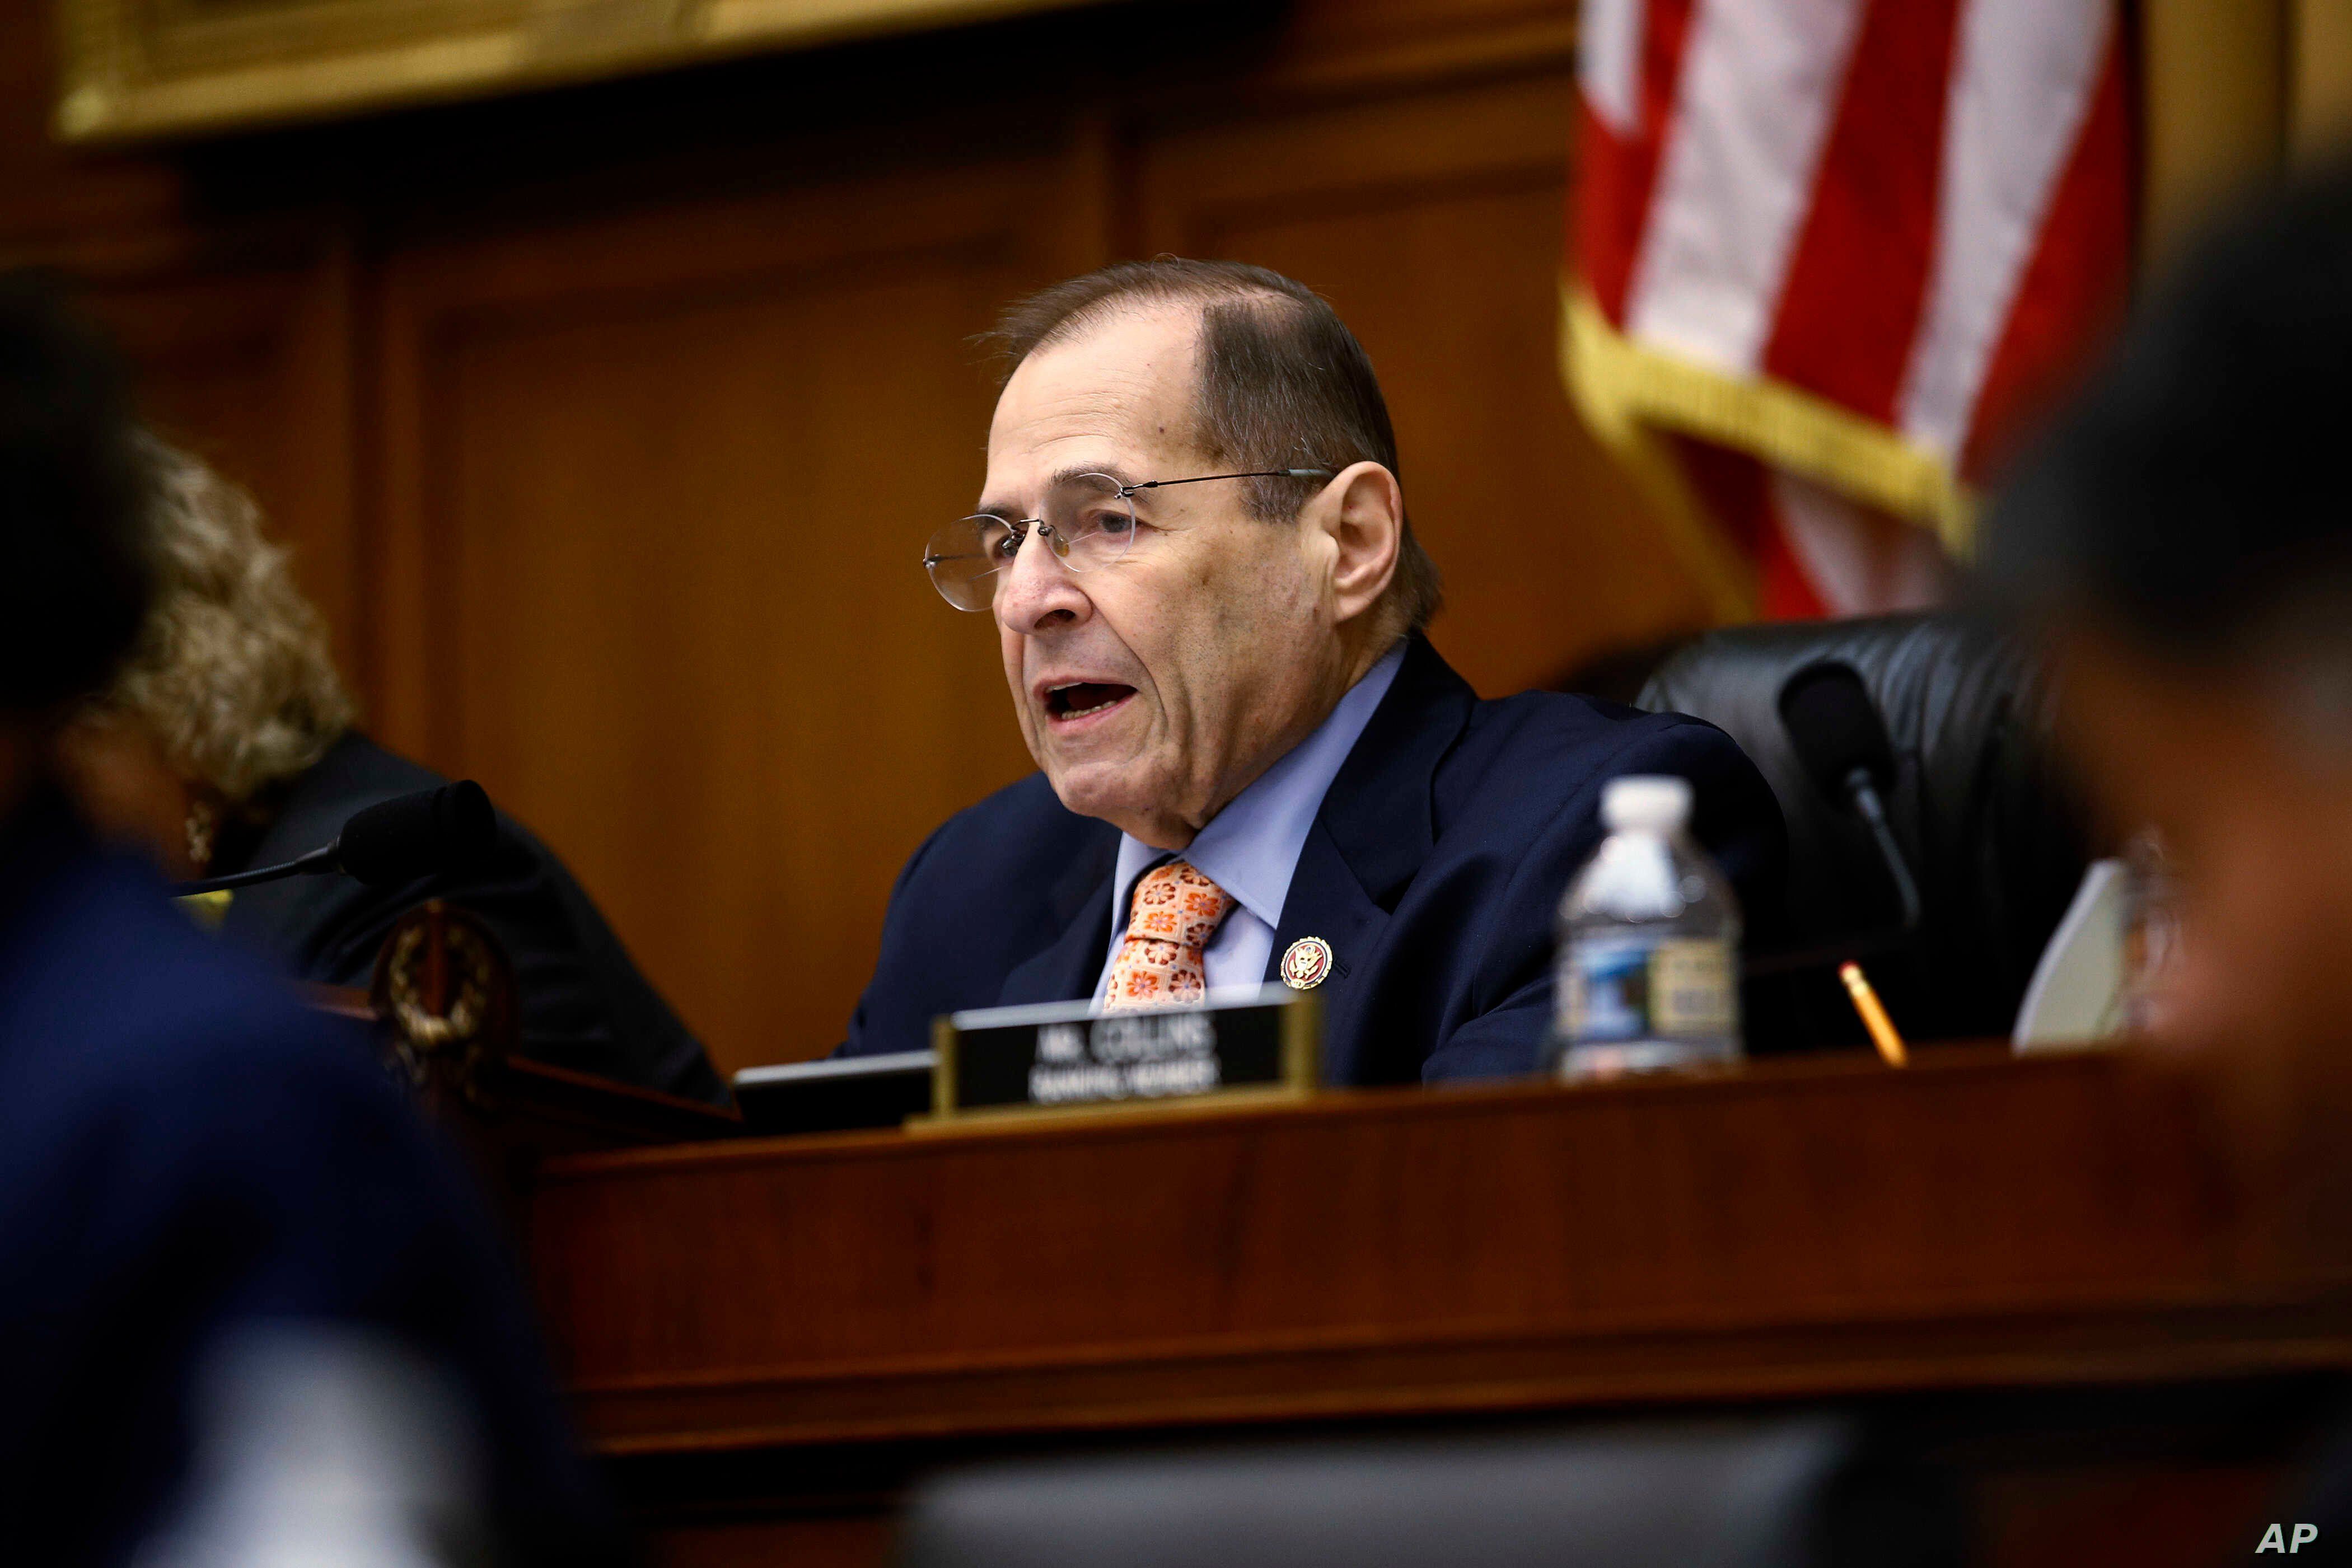 House Judiciary Committee Chairman Jerrold Nadler, D-N.Y., speaks during a hearing without former White House Counsel Don McGahn, who was a key figure in special counsel Robert Mueller's investigation, on Capitol Hill in Washington, May 21, 2019. 